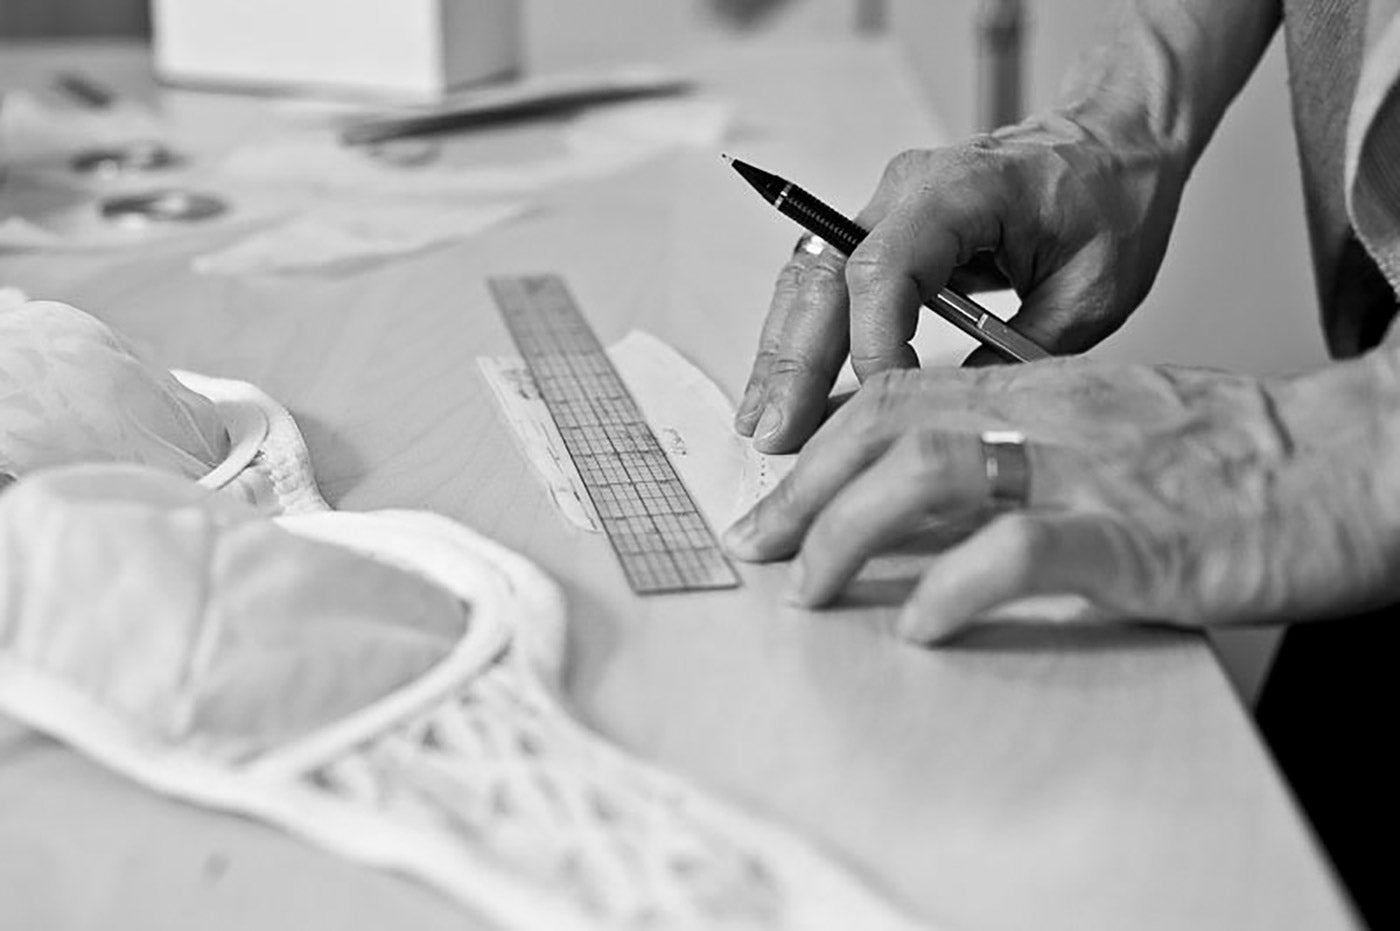 Close up of a woman's hands with a ruler and pencil, making adjustments to a sewing pattern piece for a bra. An unfinished, lacy bra lays on the table nearby.